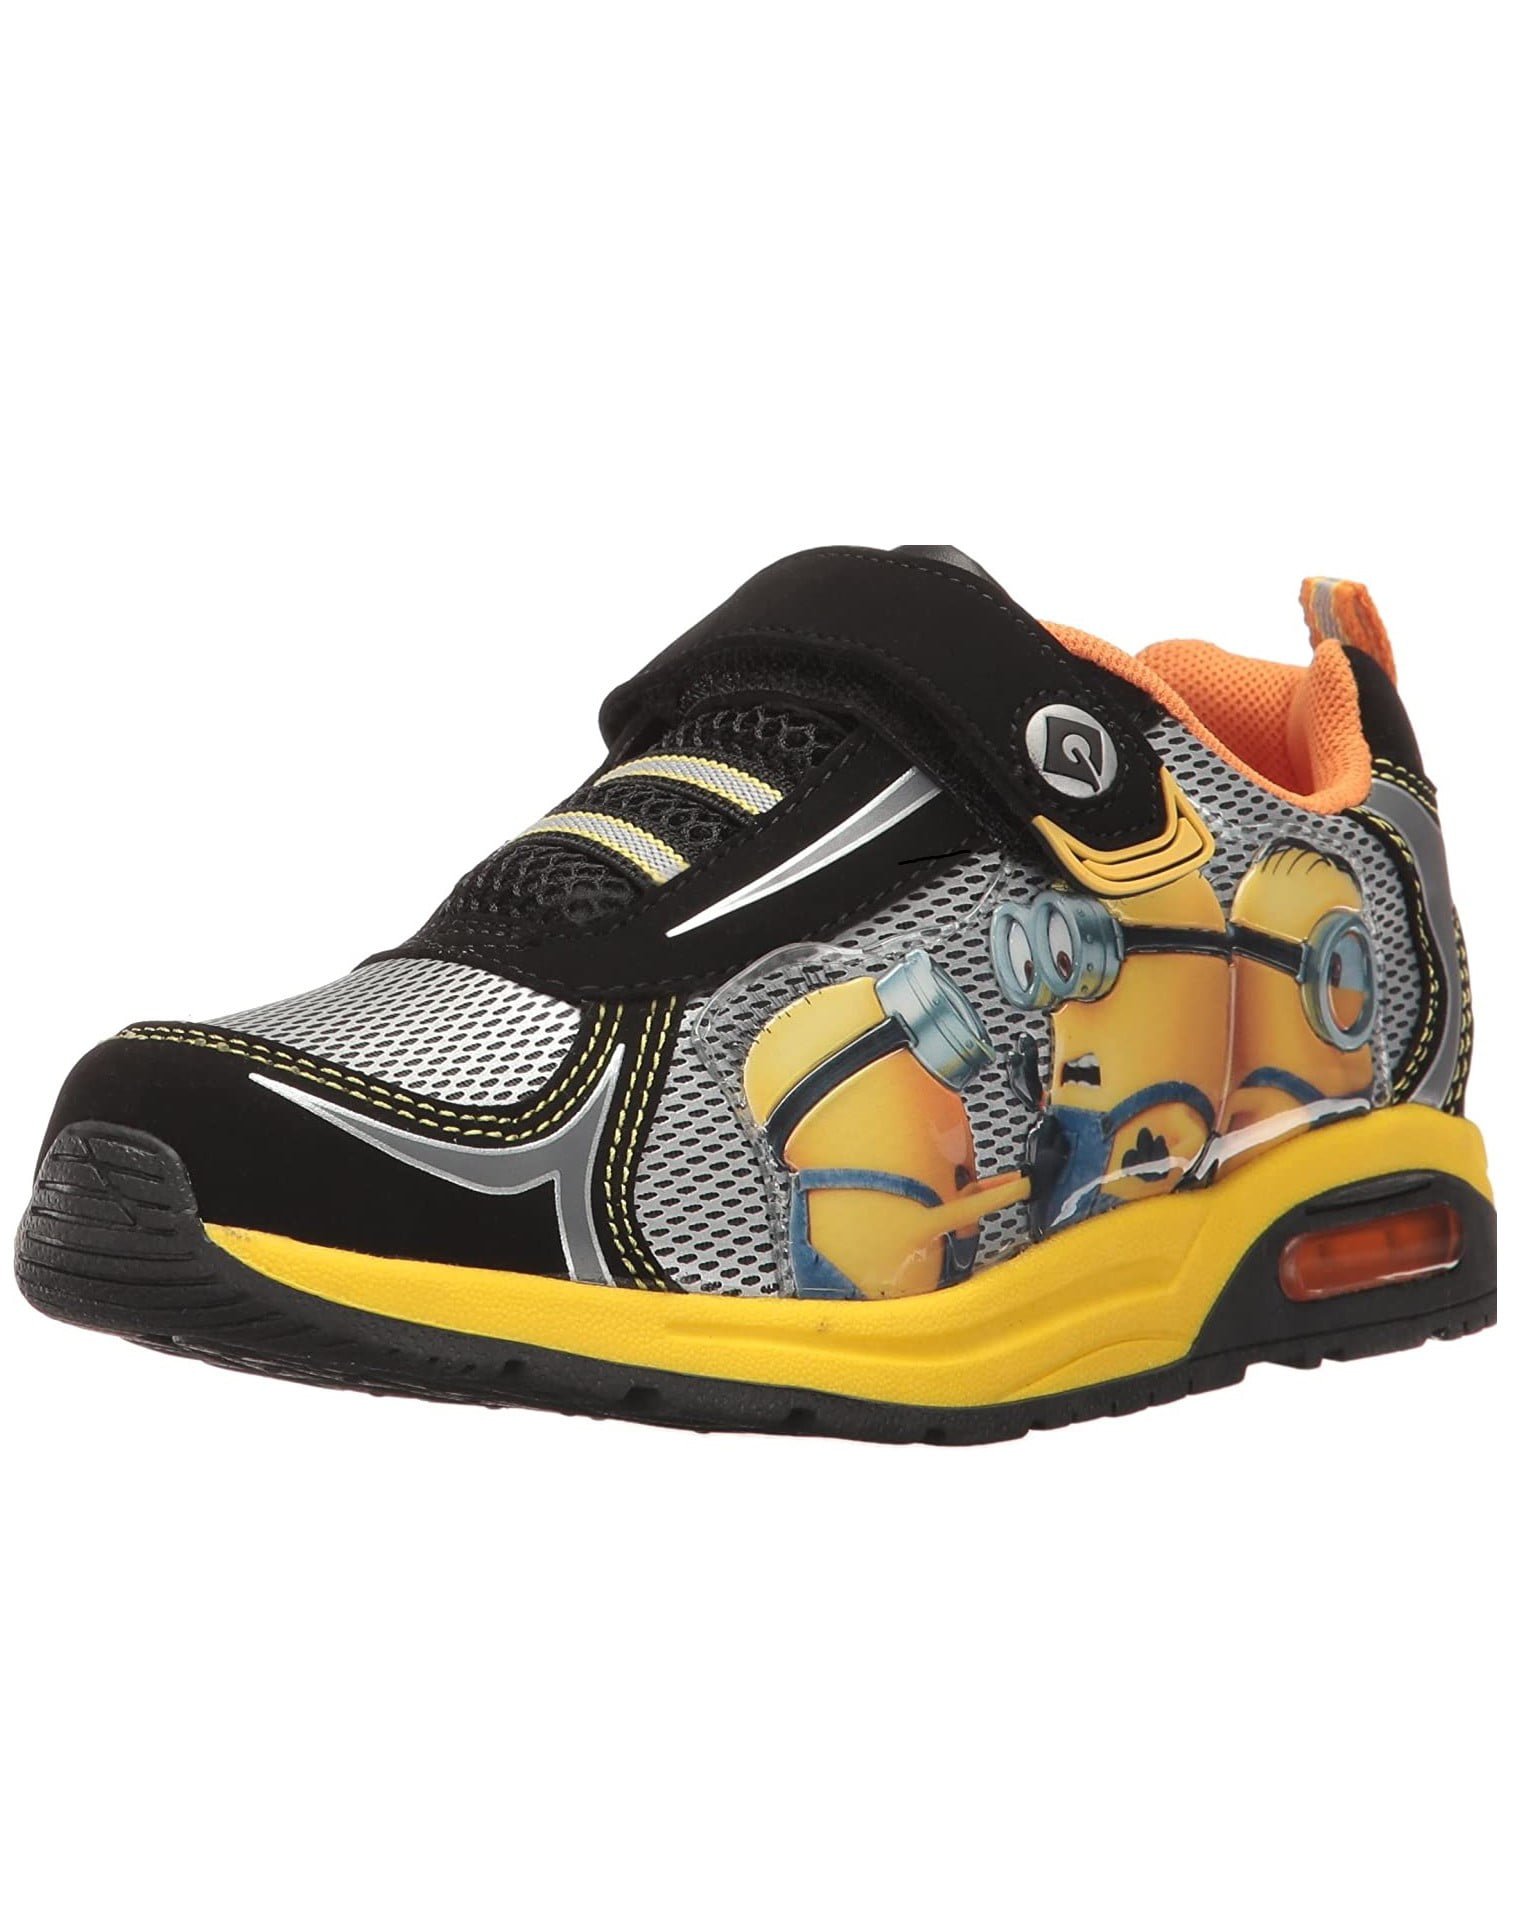 *NEW* DESPICABLE ME MINIONS Athletic/ Sneakers~ Sz 10 